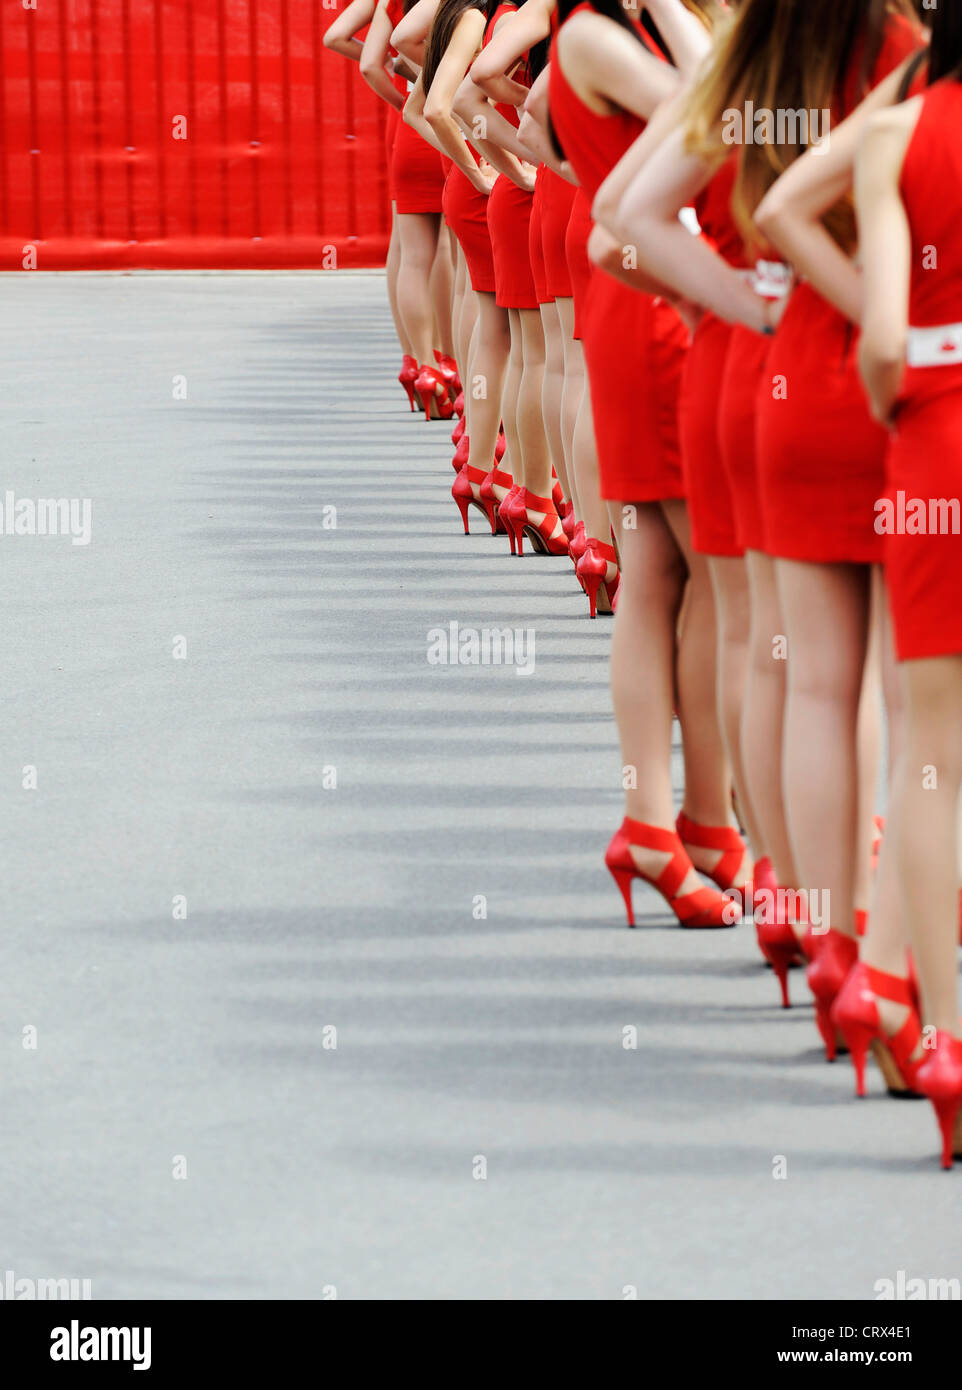 women wearing red dresses and red high-heeled shoes stand in a row Stock Photo